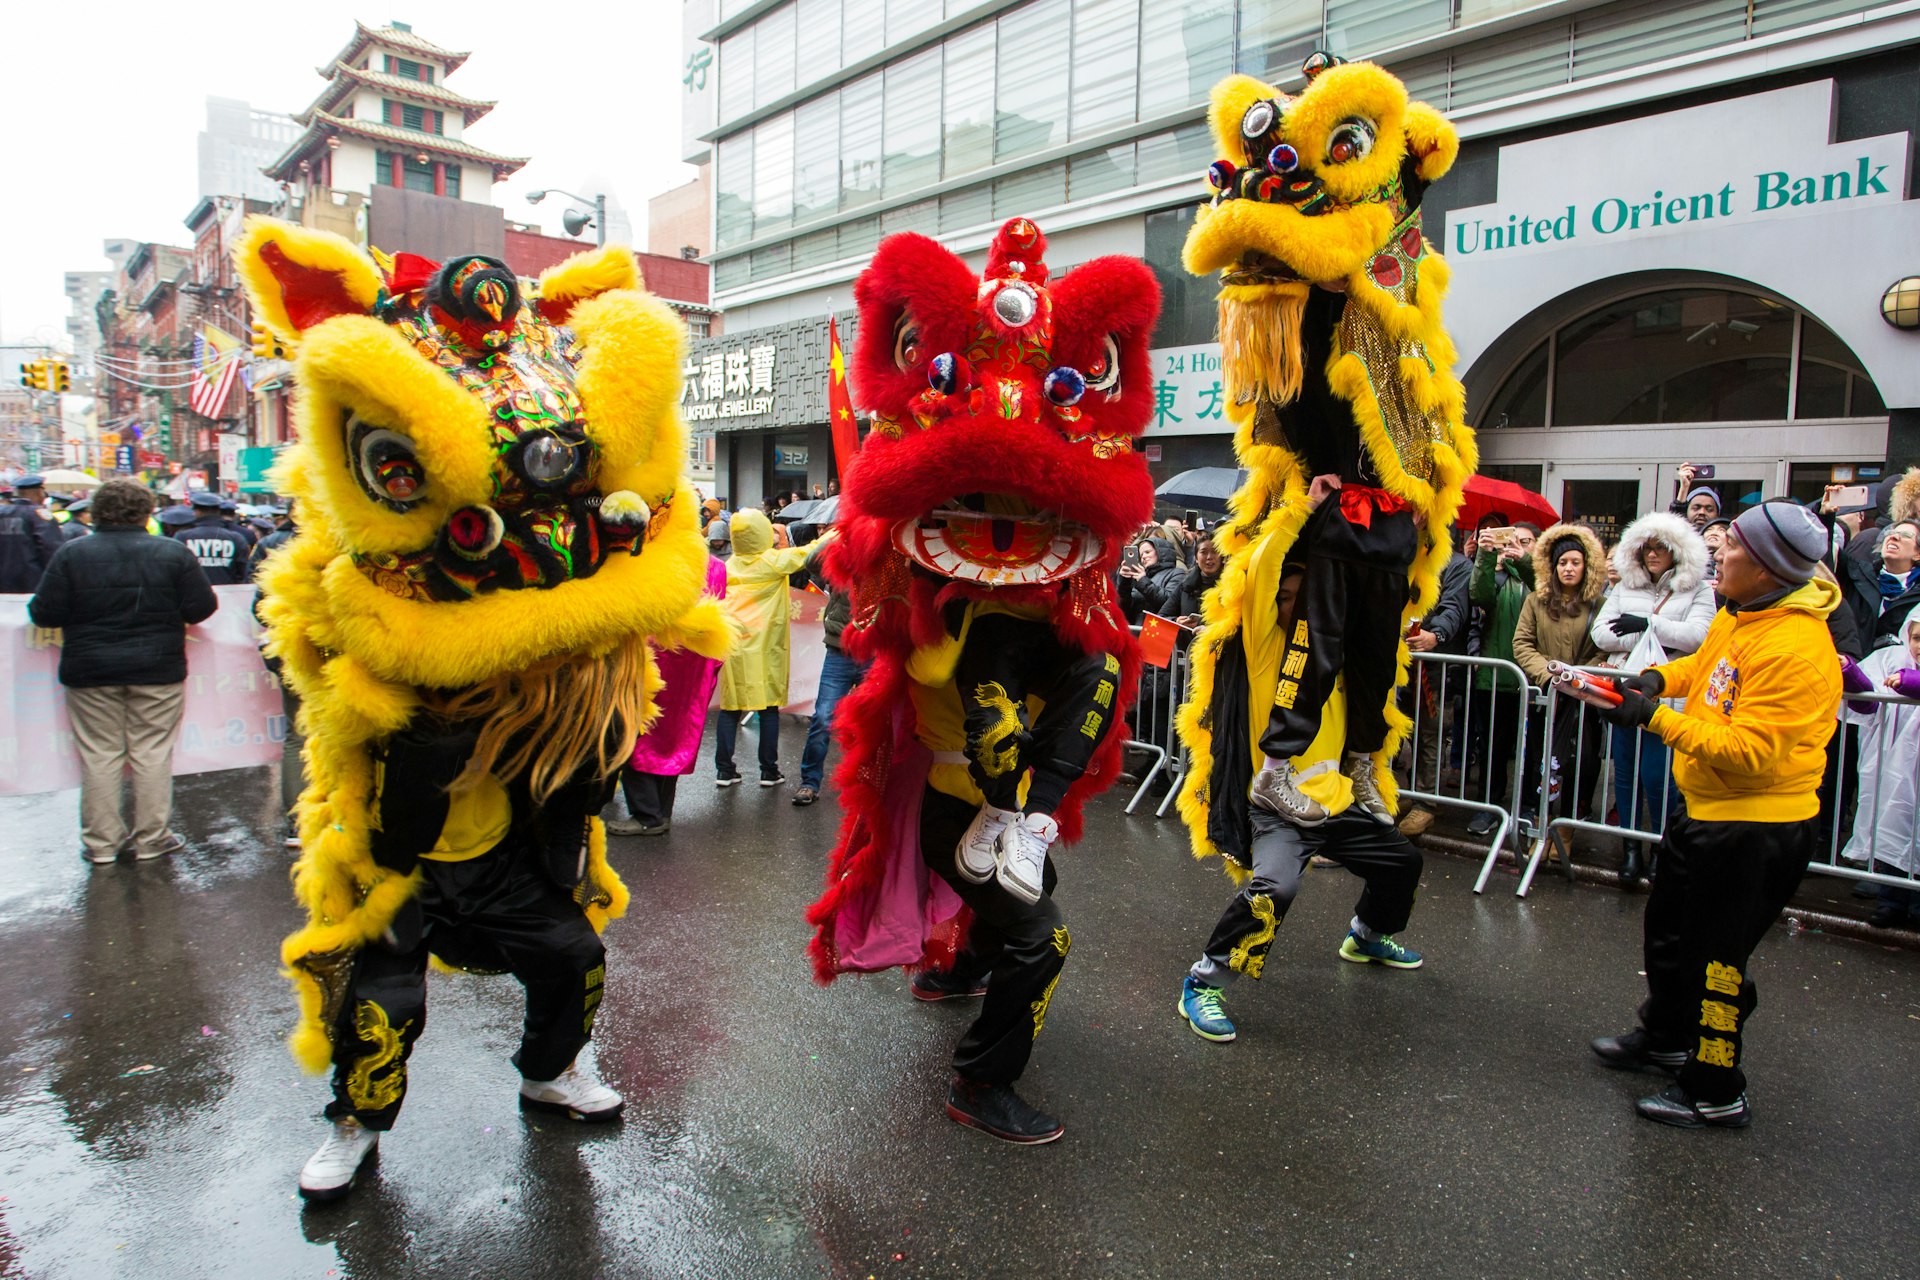 Dancers in brightly colored traditional costumes perform in the rain during a Chinese Lunar New Year parade in Chinatown, New York City, New York, USA